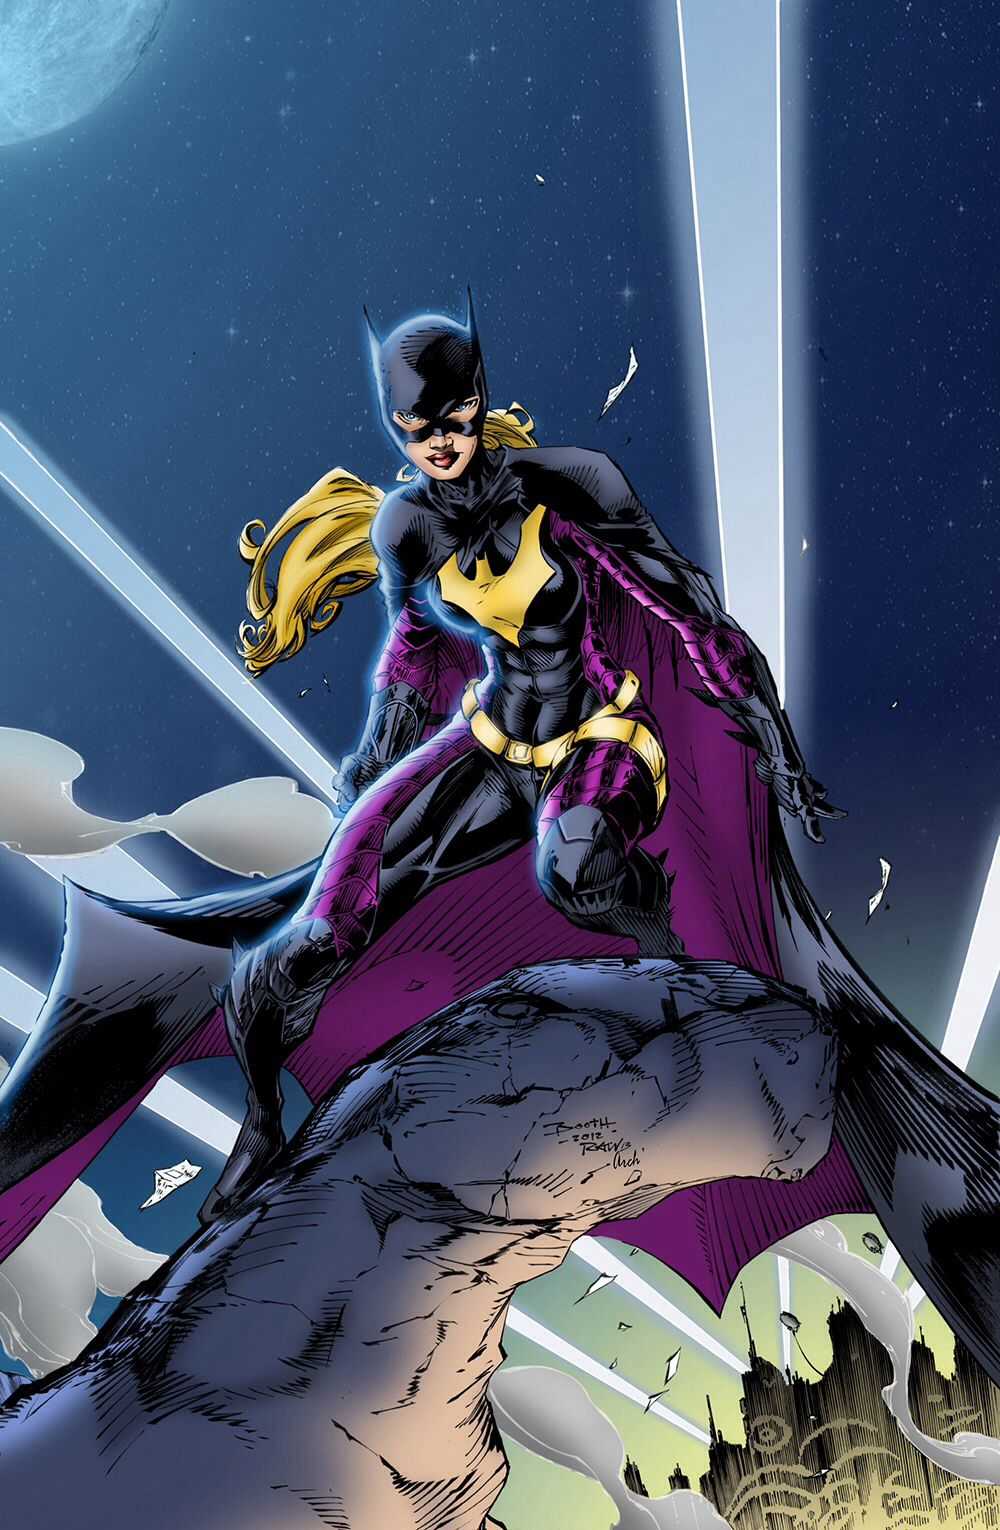 Hot Picture Of Stephanie Brown That Will Make Your Heart Pound For Her